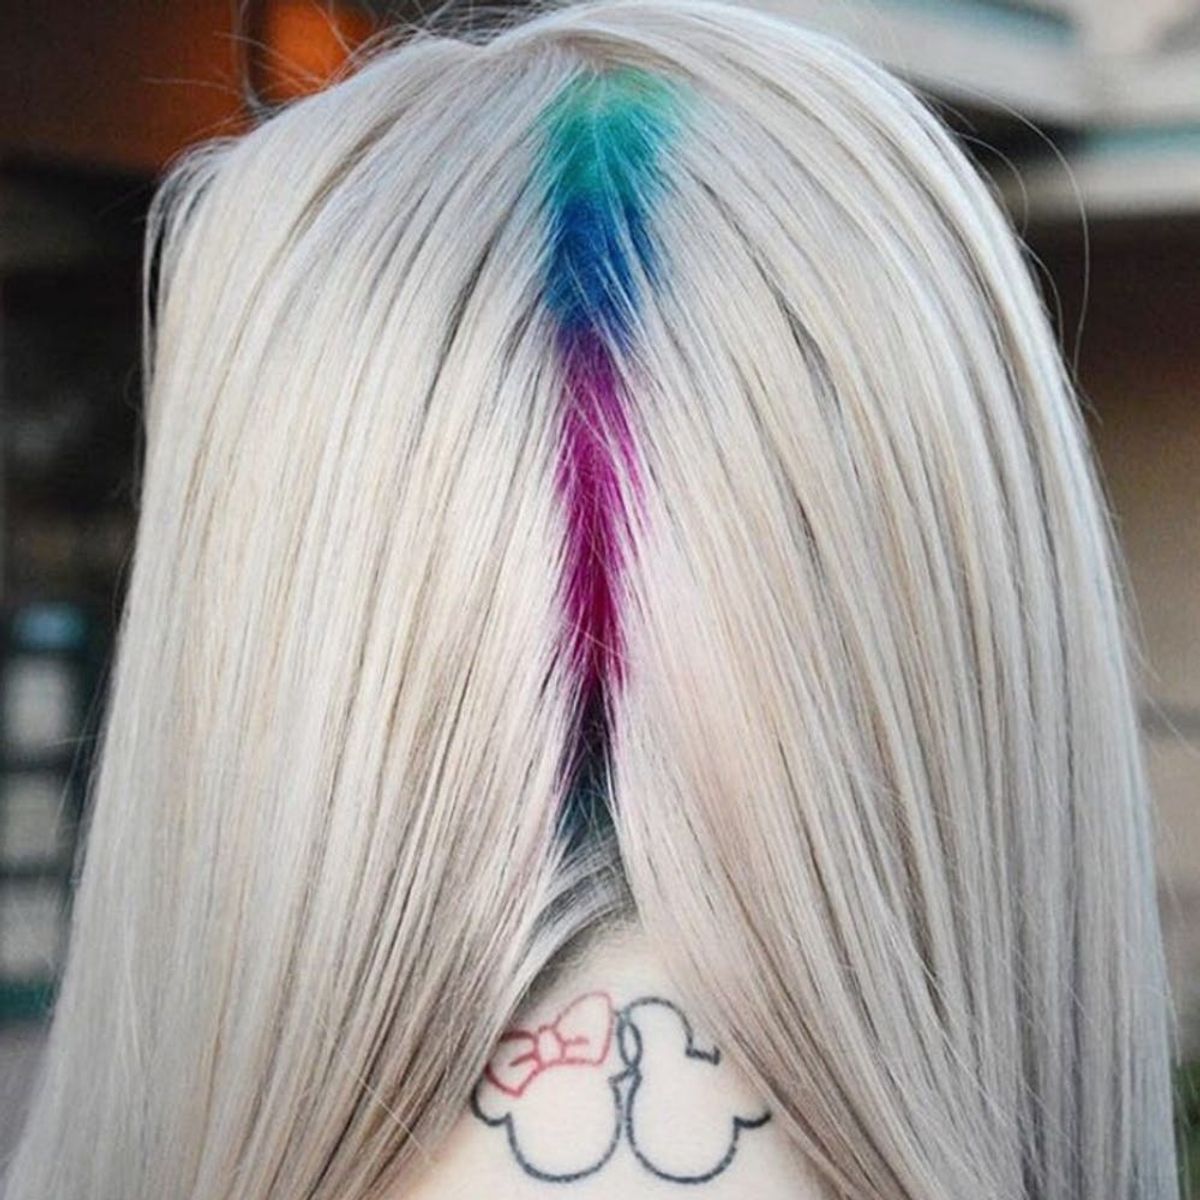 Rainbow Roots Are the Subtle Hair Trend You Need for Summer